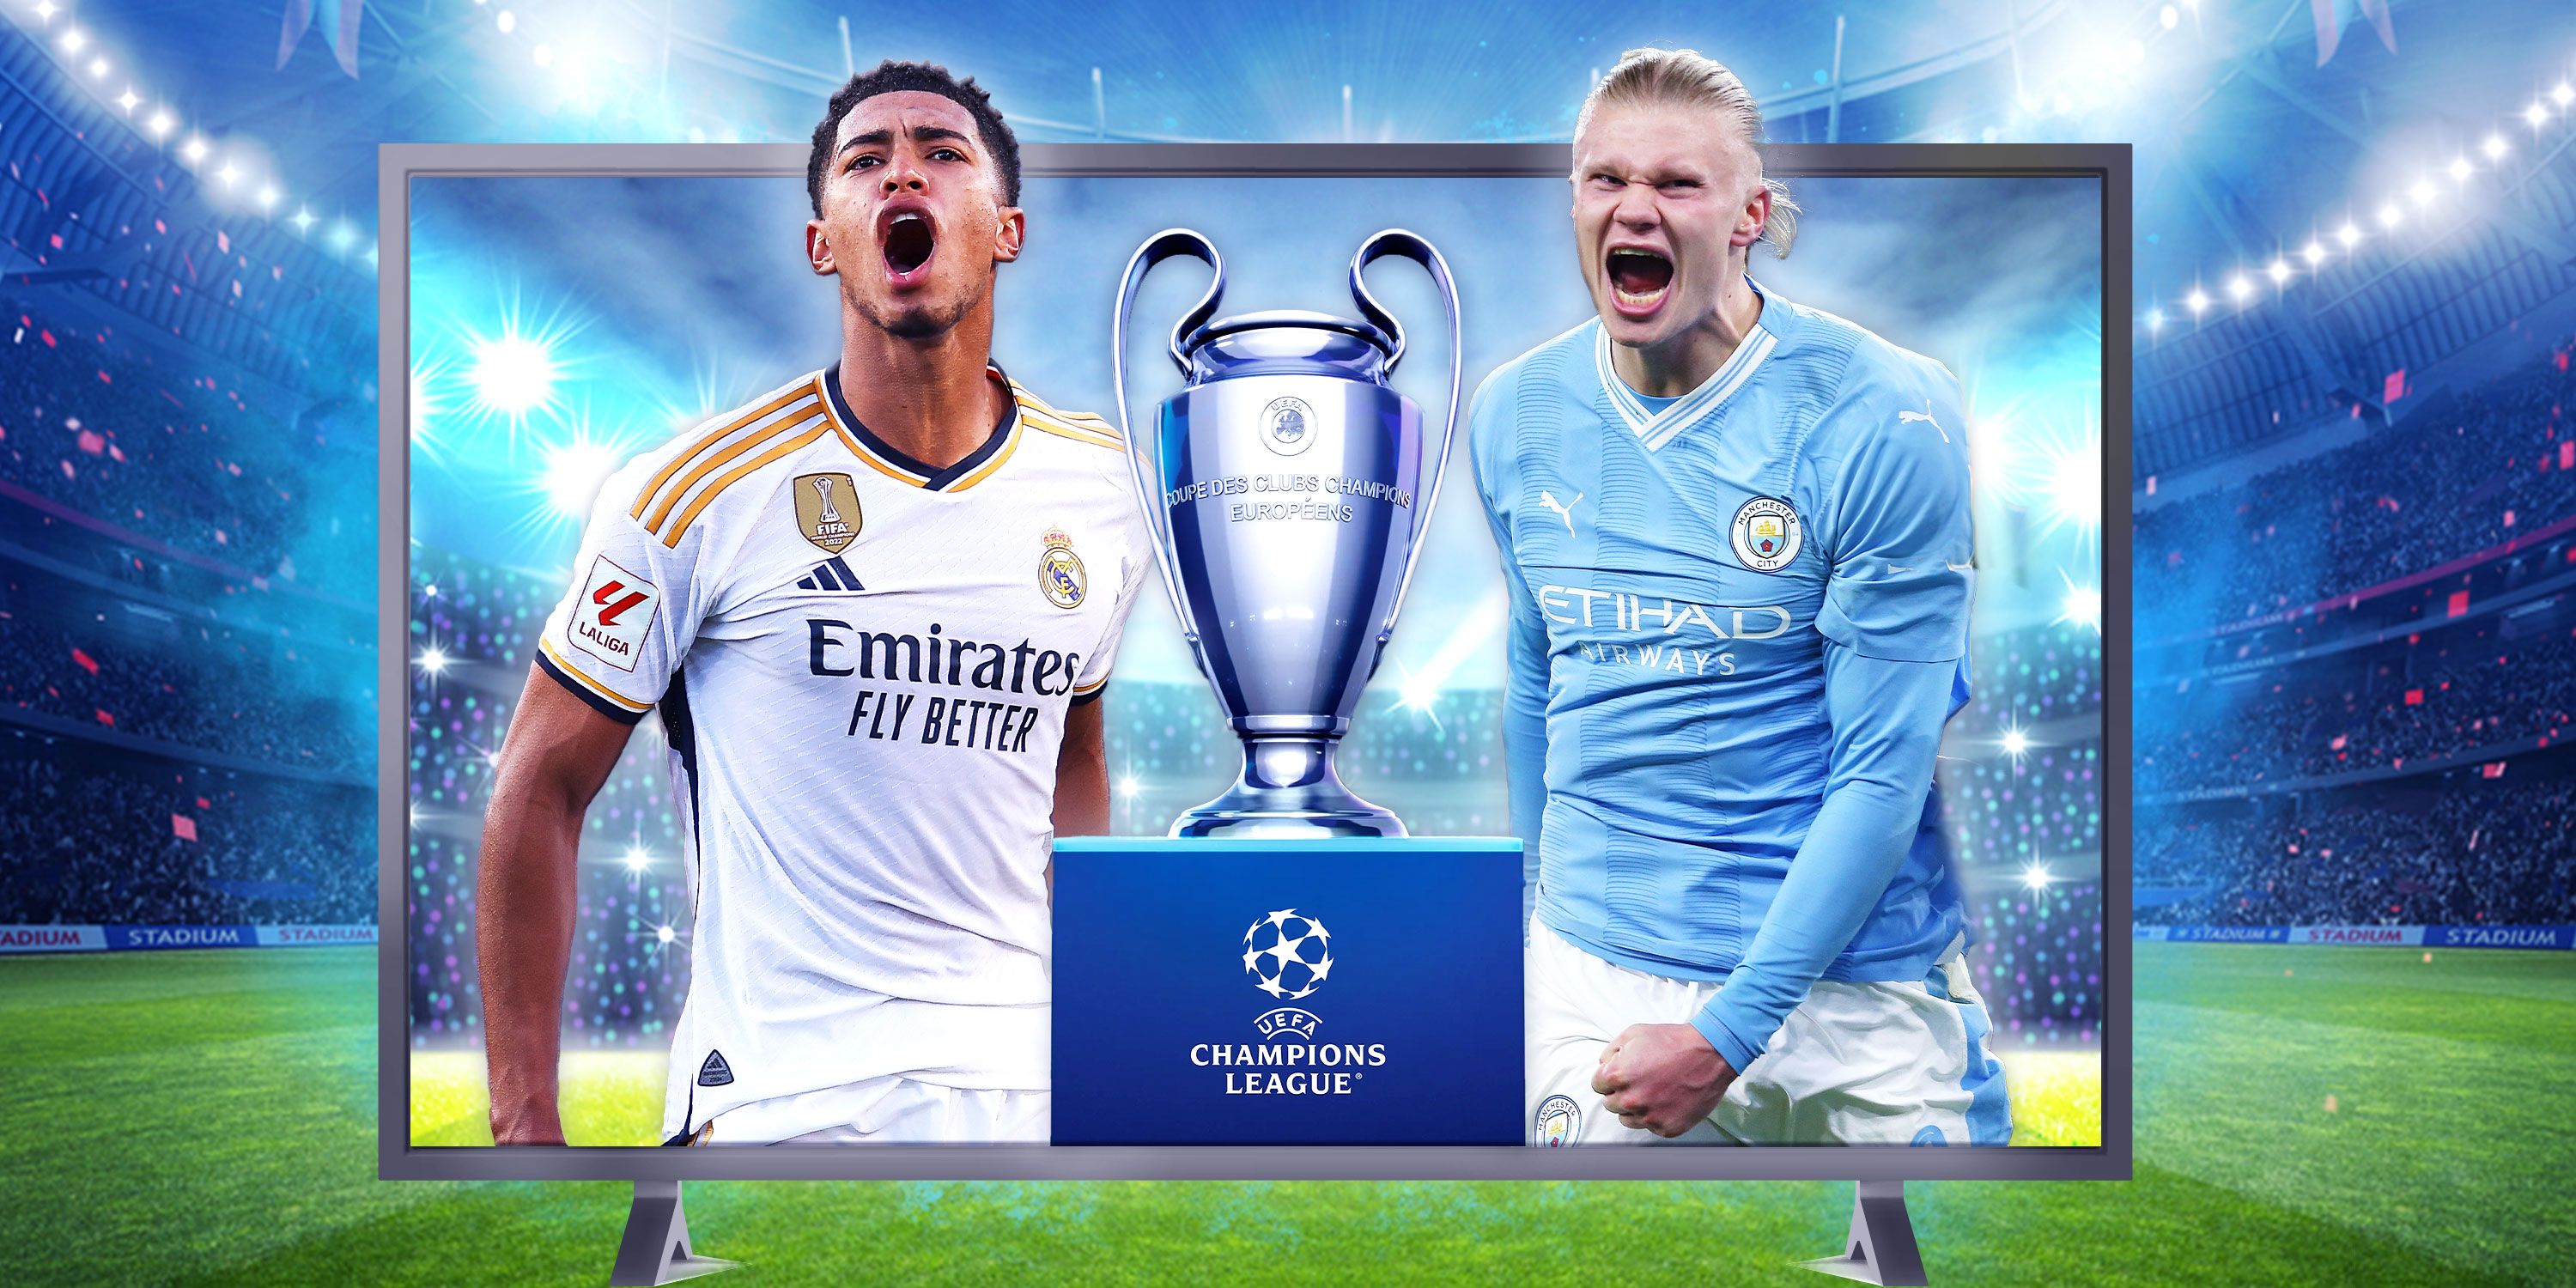 Where to watch the Champions League on TV or Streaming?